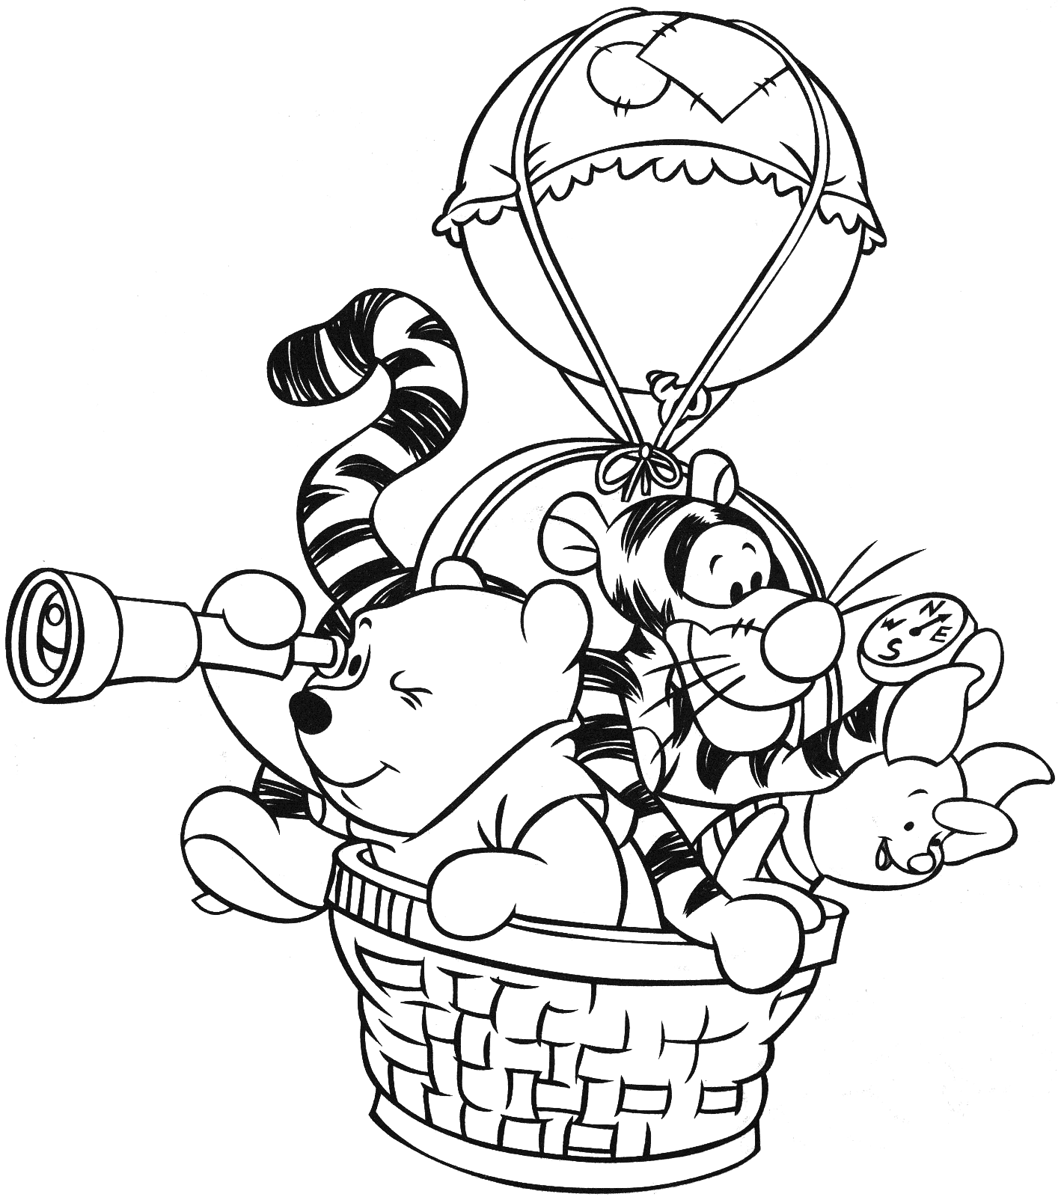 winnie the pooh colouring winnie the pooh friends coloring pages 2 disney39s the pooh winnie colouring 